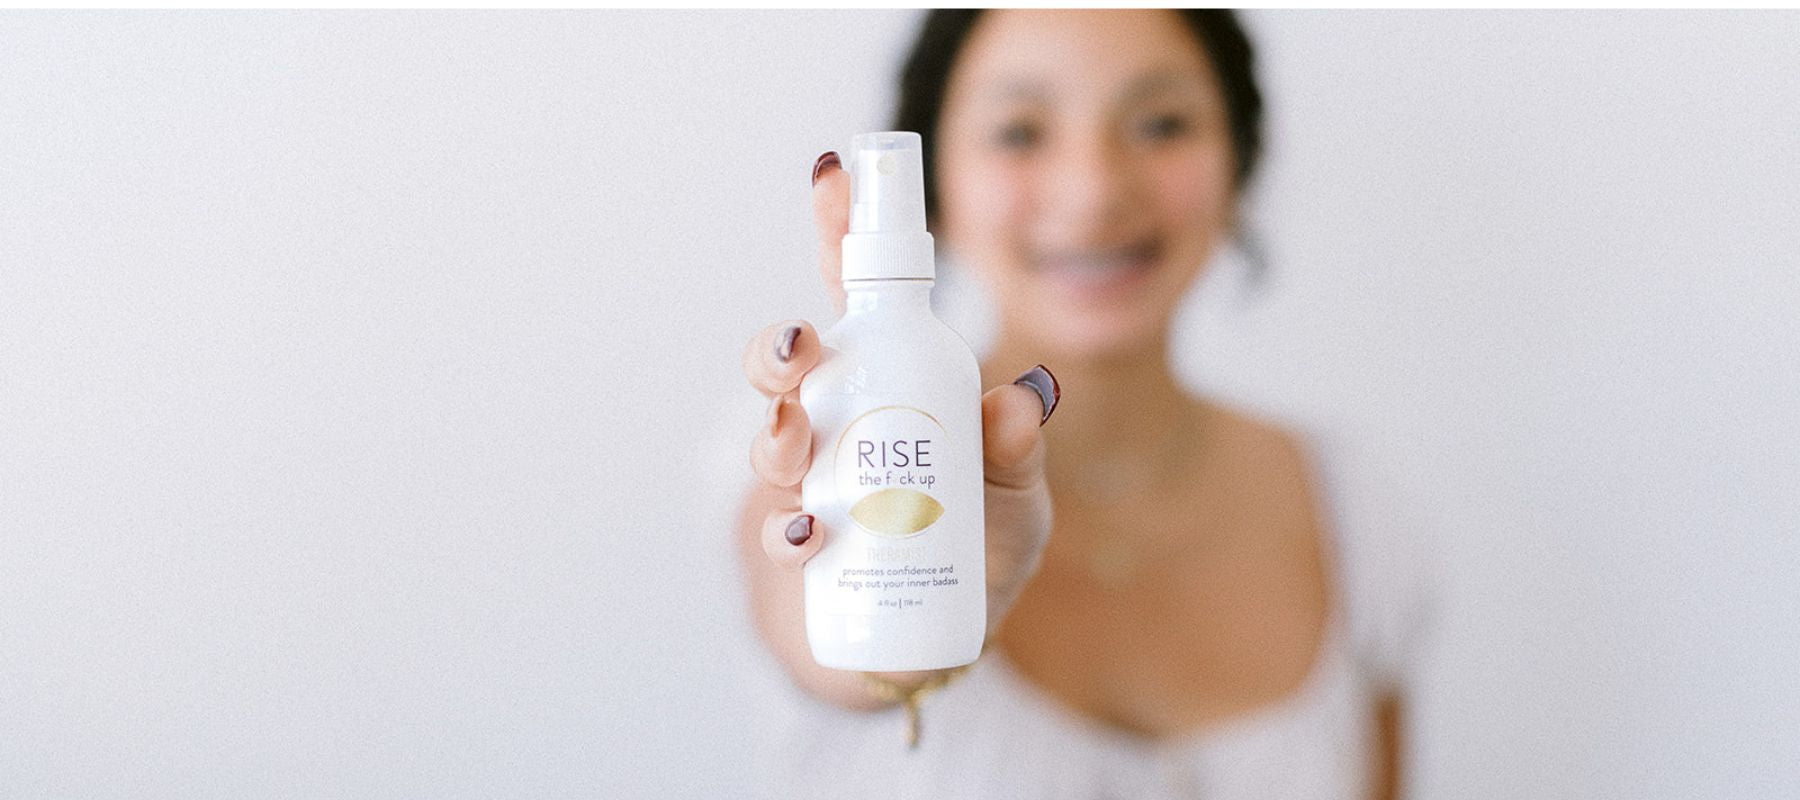 Rise up is made with organic grapefruit and cardamom essential oils and energizing flower essences.